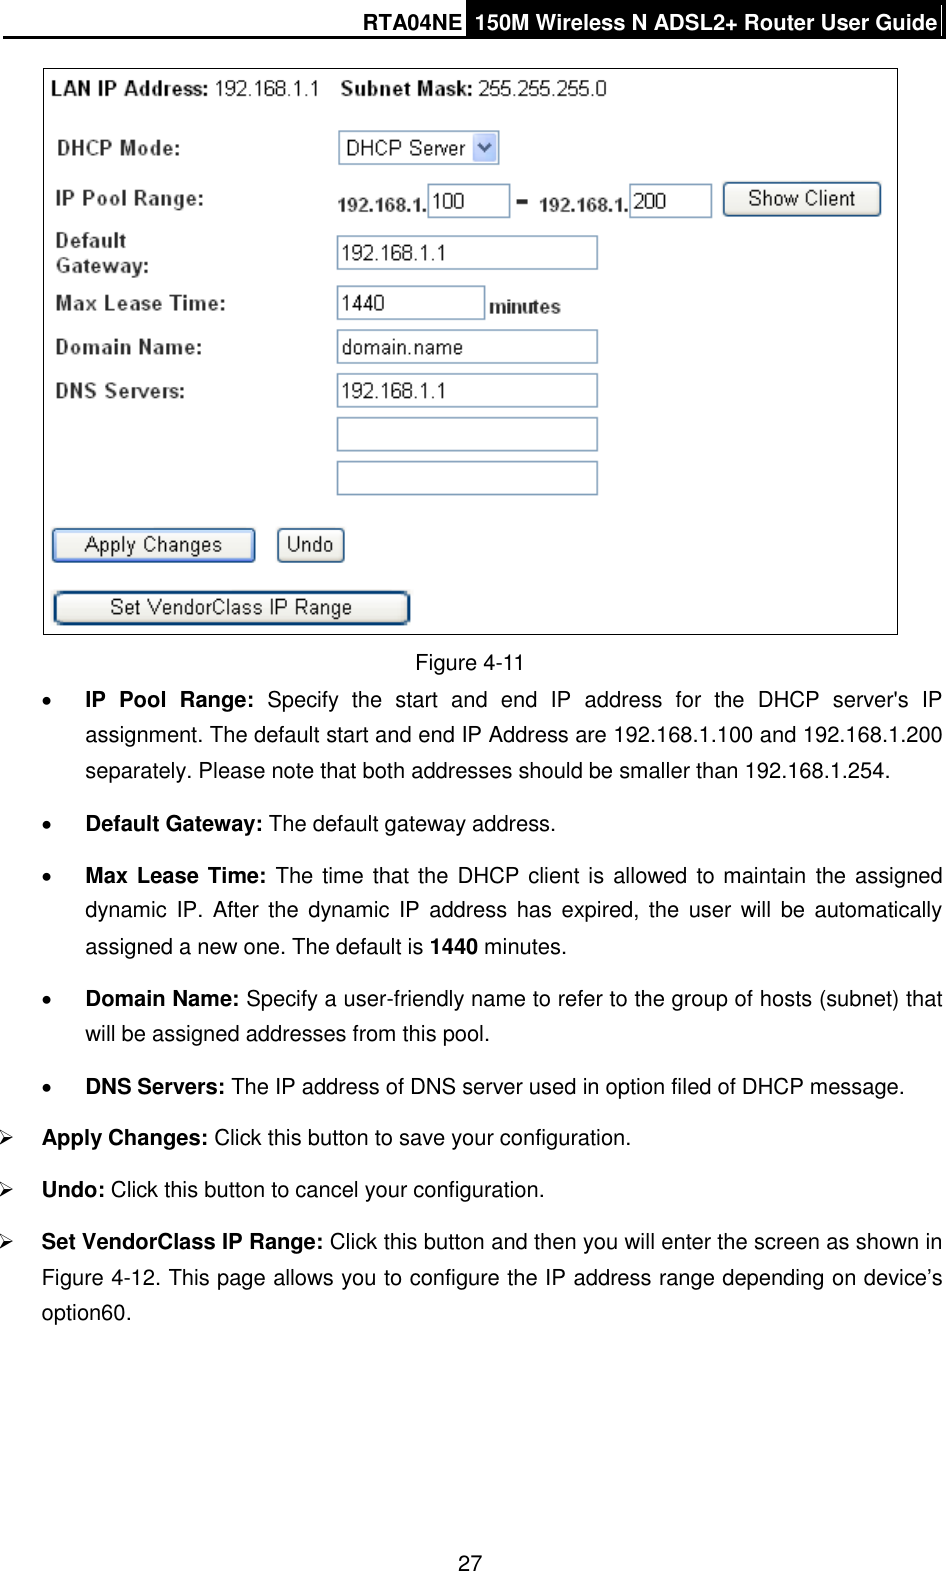 RTA04NE 150M Wireless N ADSL2+ Router User Guide  27  Figure 4-11  IP  Pool  Range:  Specify  the  start  and  end  IP  address  for  the  DHCP  server&apos;s  IP assignment. The default start and end IP Address are 192.168.1.100 and 192.168.1.200 separately. Please note that both addresses should be smaller than 192.168.1.254.  Default Gateway: The default gateway address.  Max Lease Time: The time that the DHCP client is allowed to maintain  the assigned dynamic IP.  After the dynamic IP  address has  expired, the  user  will be  automatically assigned a new one. The default is 1440 minutes.  Domain Name: Specify a user-friendly name to refer to the group of hosts (subnet) that will be assigned addresses from this pool.  DNS Servers: The IP address of DNS server used in option filed of DHCP message.  Apply Changes: Click this button to save your configuration.  Undo: Click this button to cancel your configuration.  Set VendorClass IP Range: Click this button and then you will enter the screen as shown in Figure 4-12. This page allows you to configure the IP address range depending on device’s option60. 